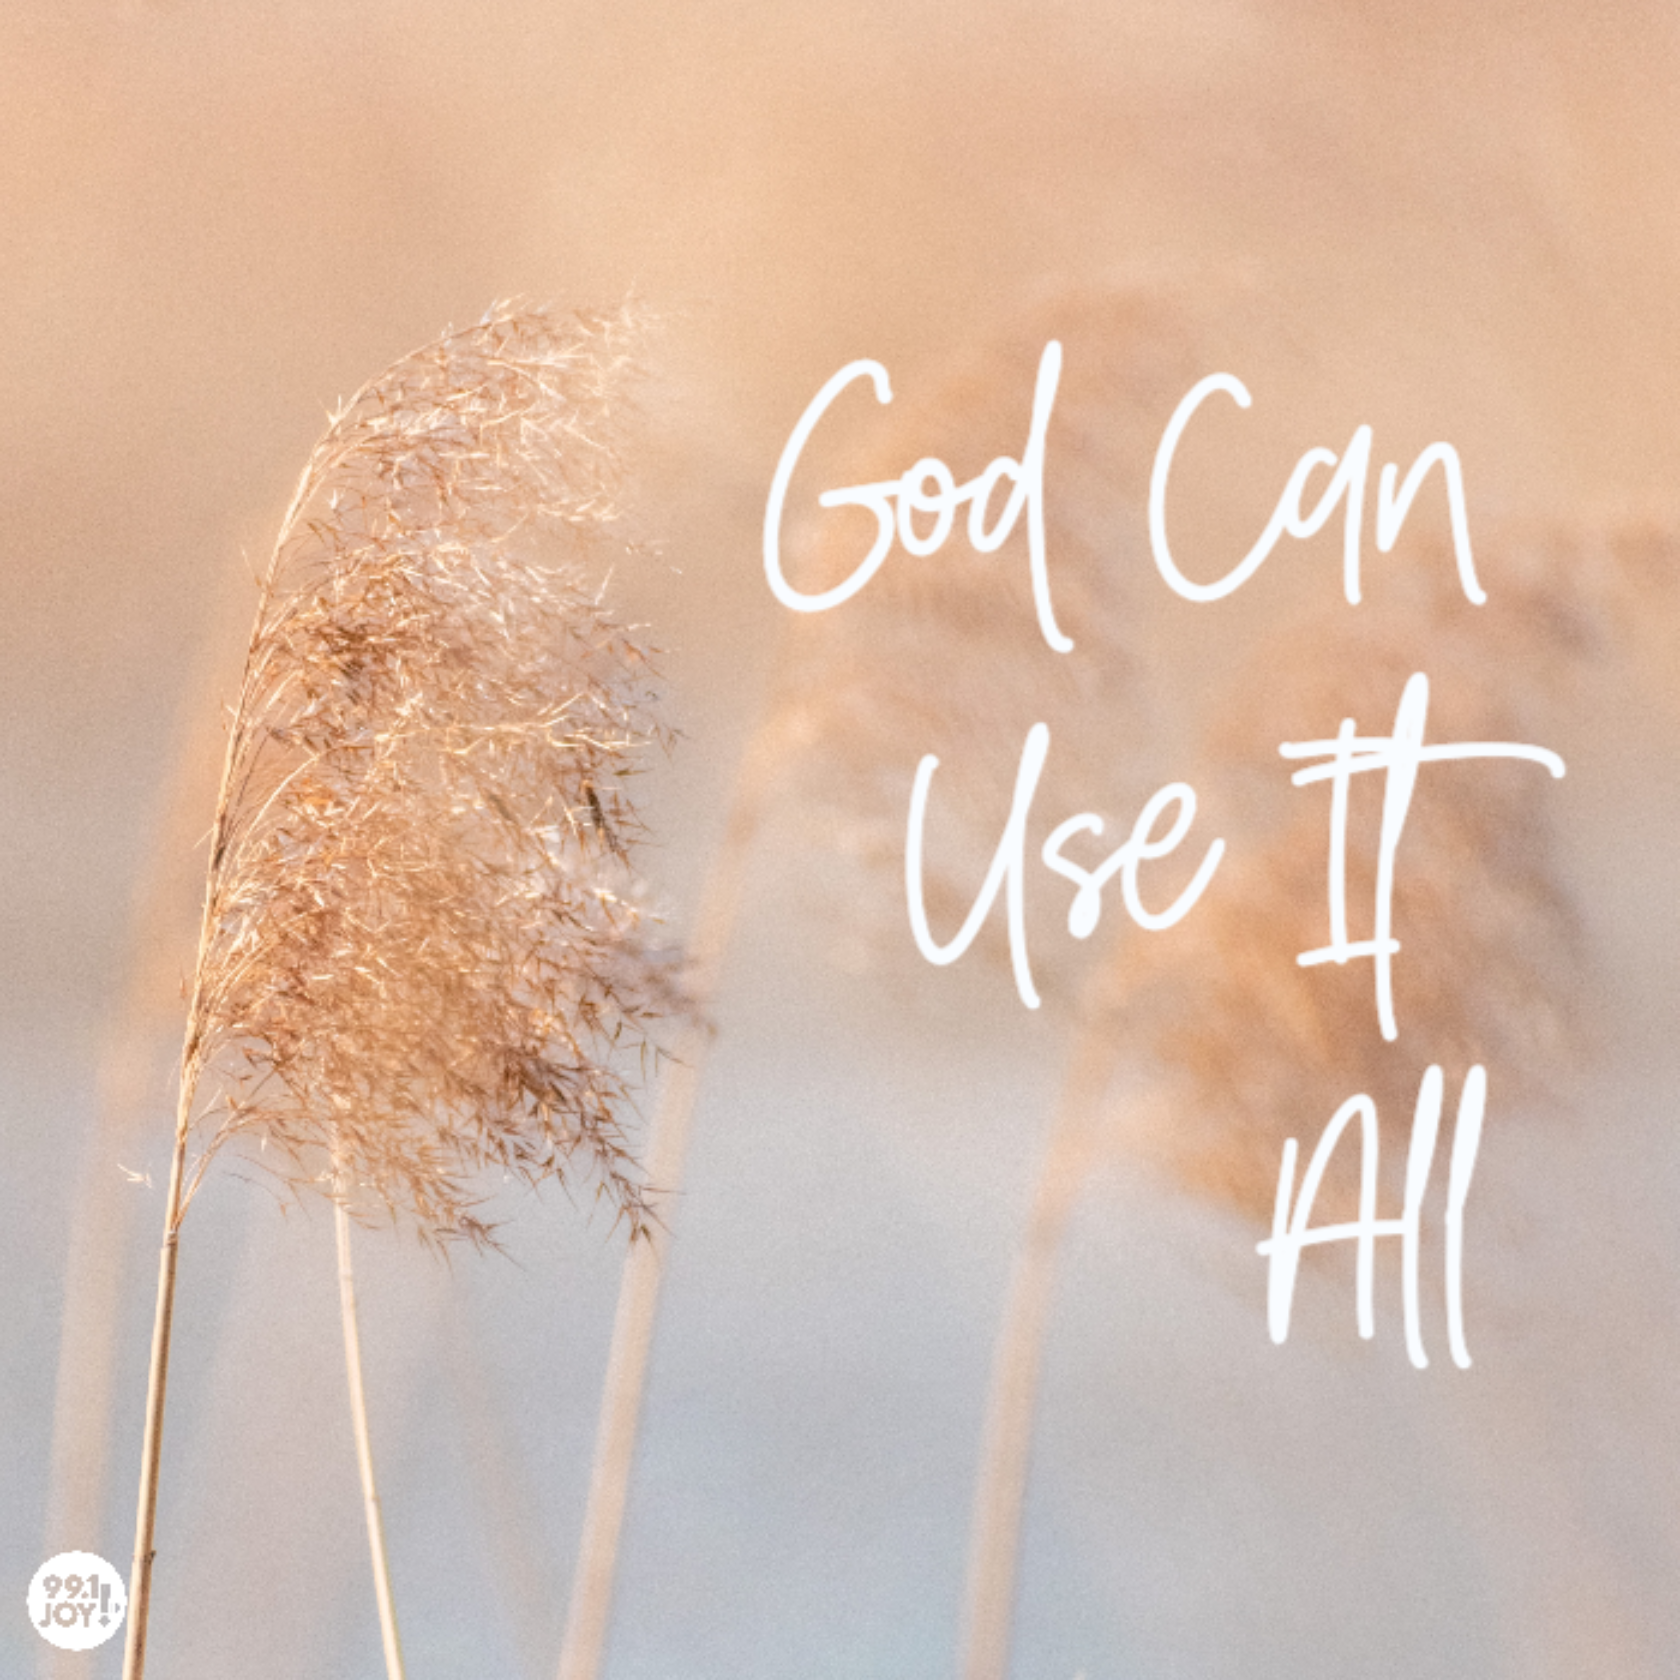 God Can Use It All